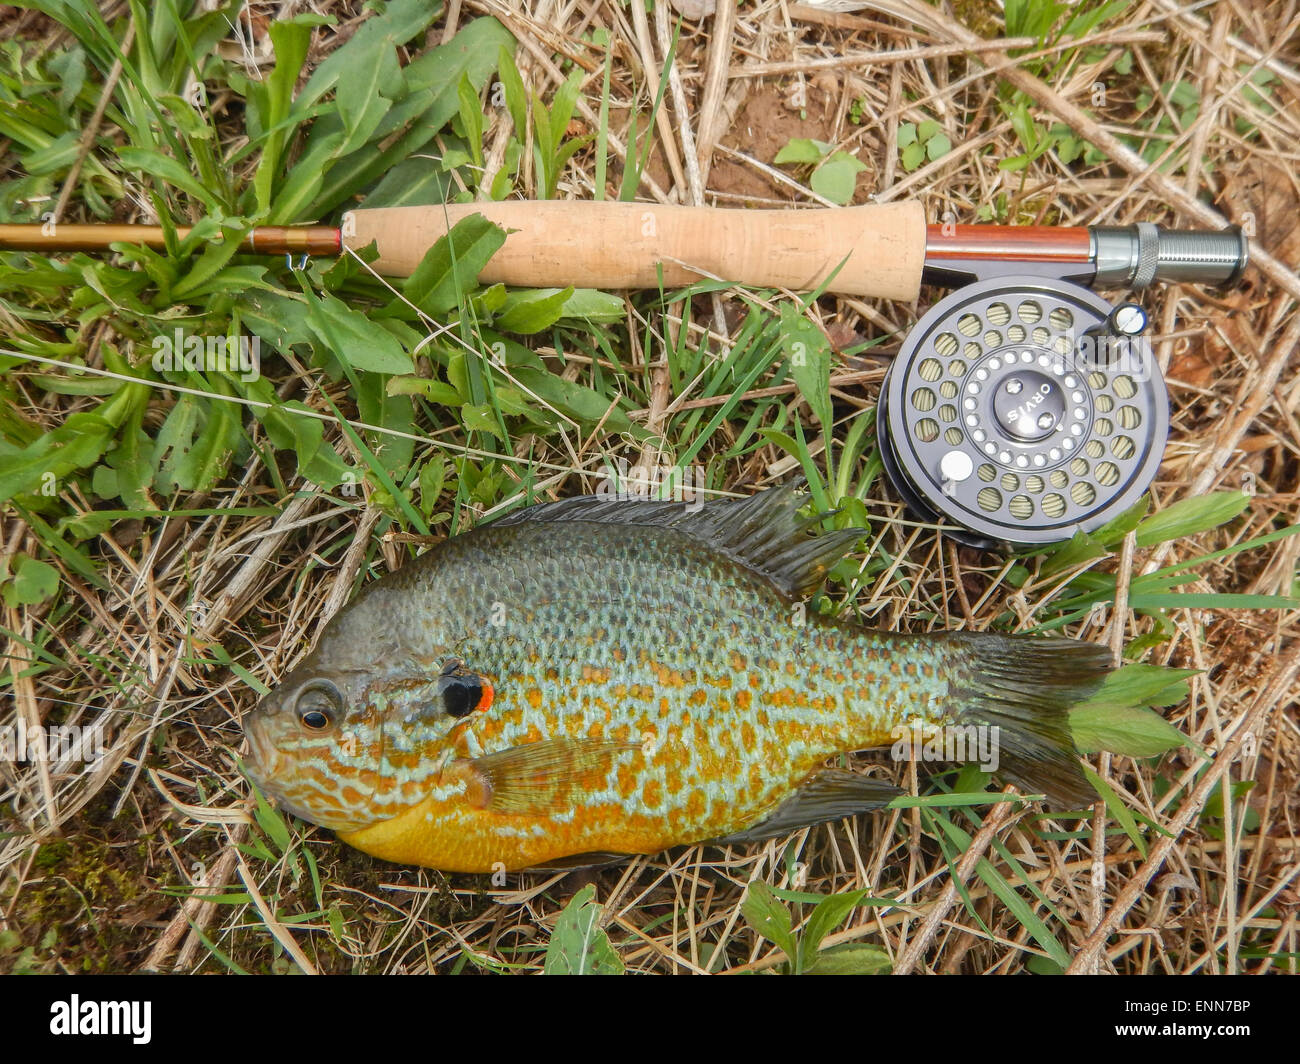 A large Pumpkinseed panfish laying beside a flyrod and reel Stock